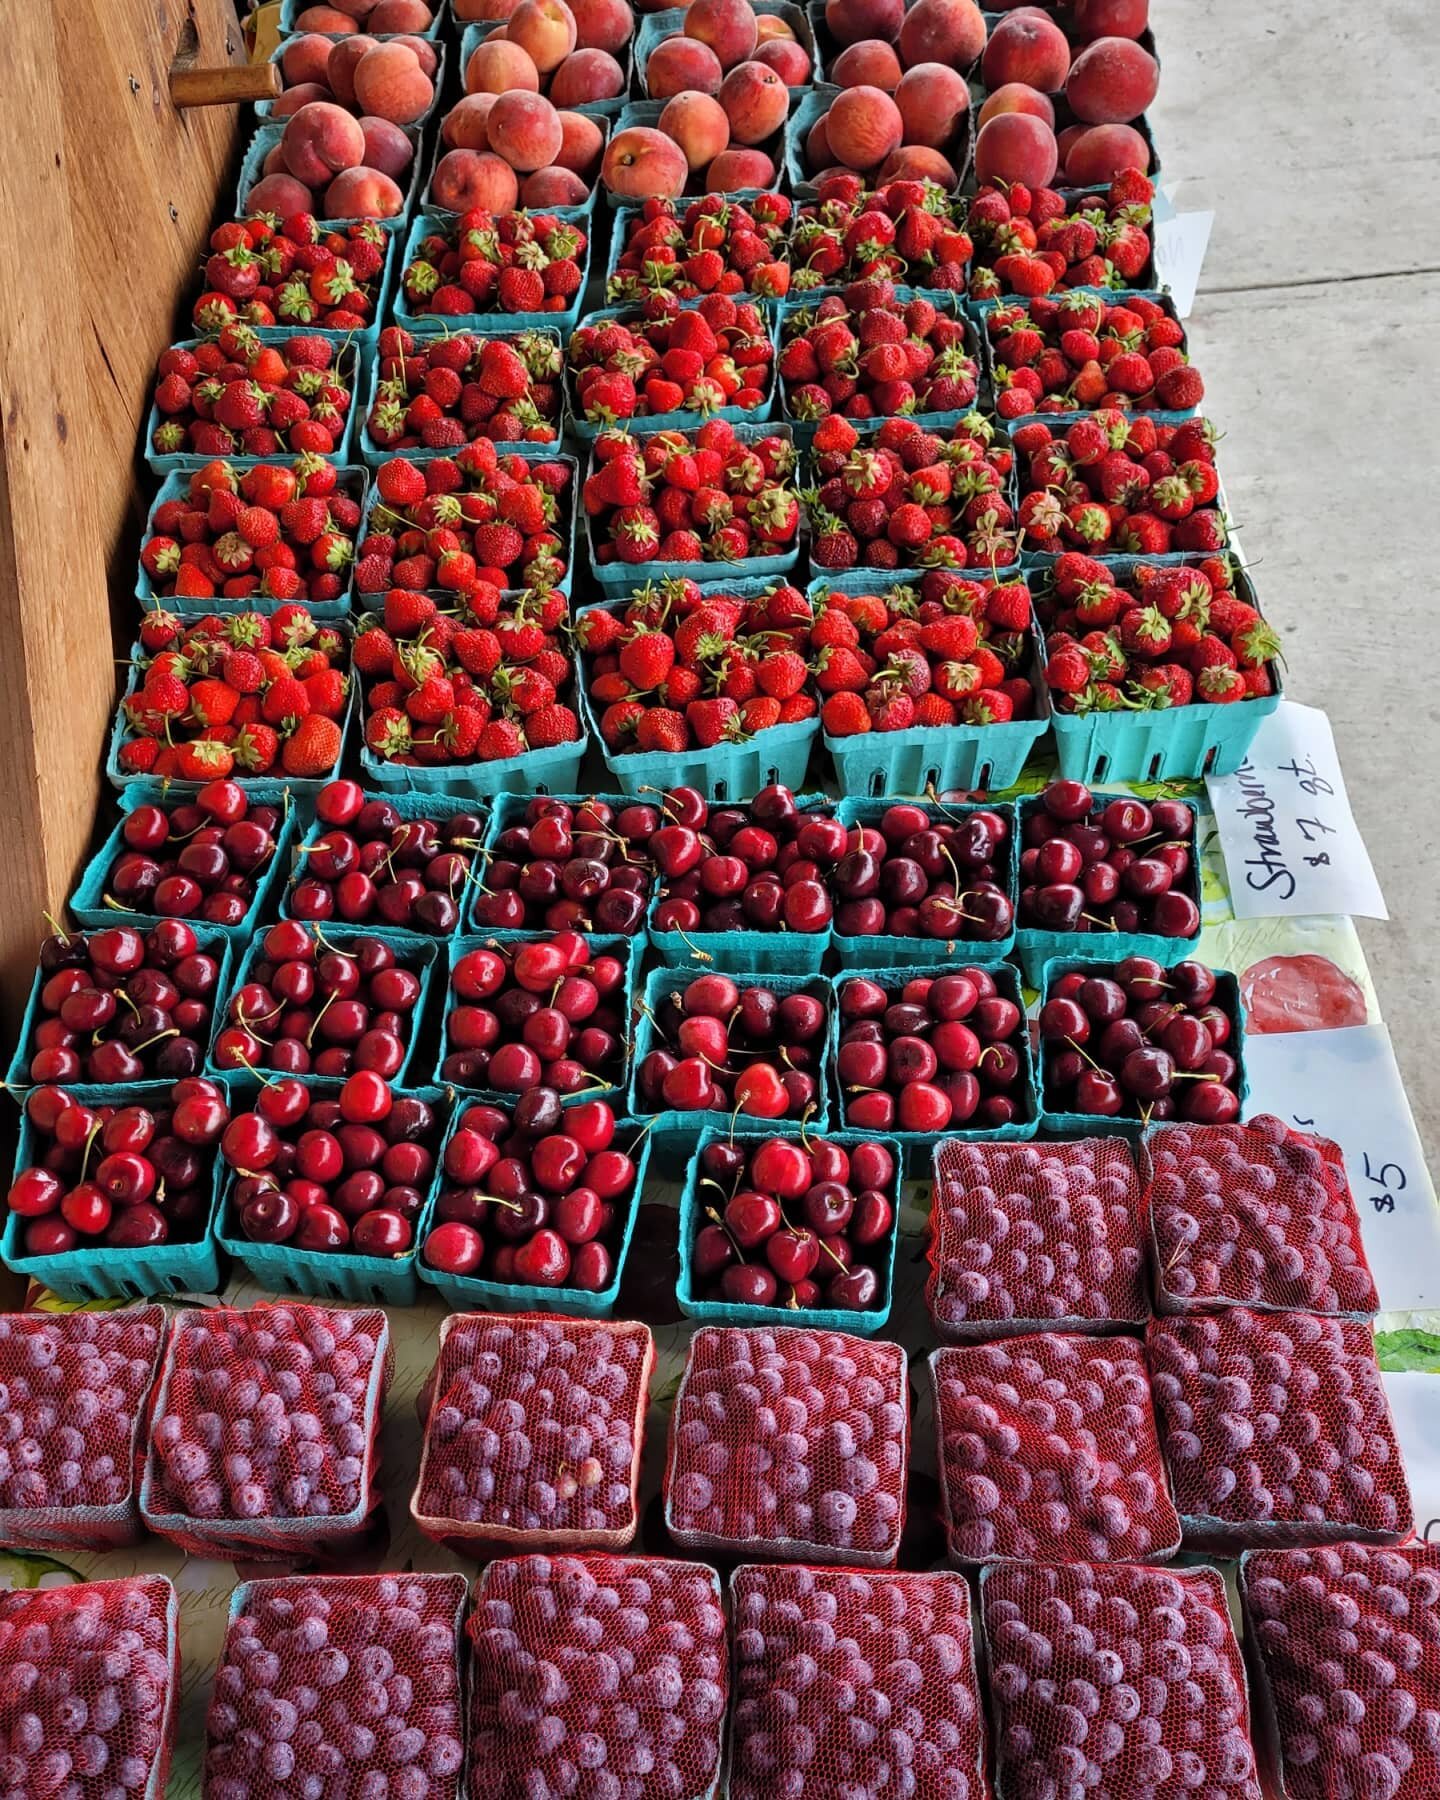 Happy 4th of July weekend!  So many awesome items this weekend!  Kick off the season for native corn, rich may peaches, green beans, zucchini, golden zucchini and yellow squash. And it's the grand finale weekend for our cherries, asparagus, strawberr